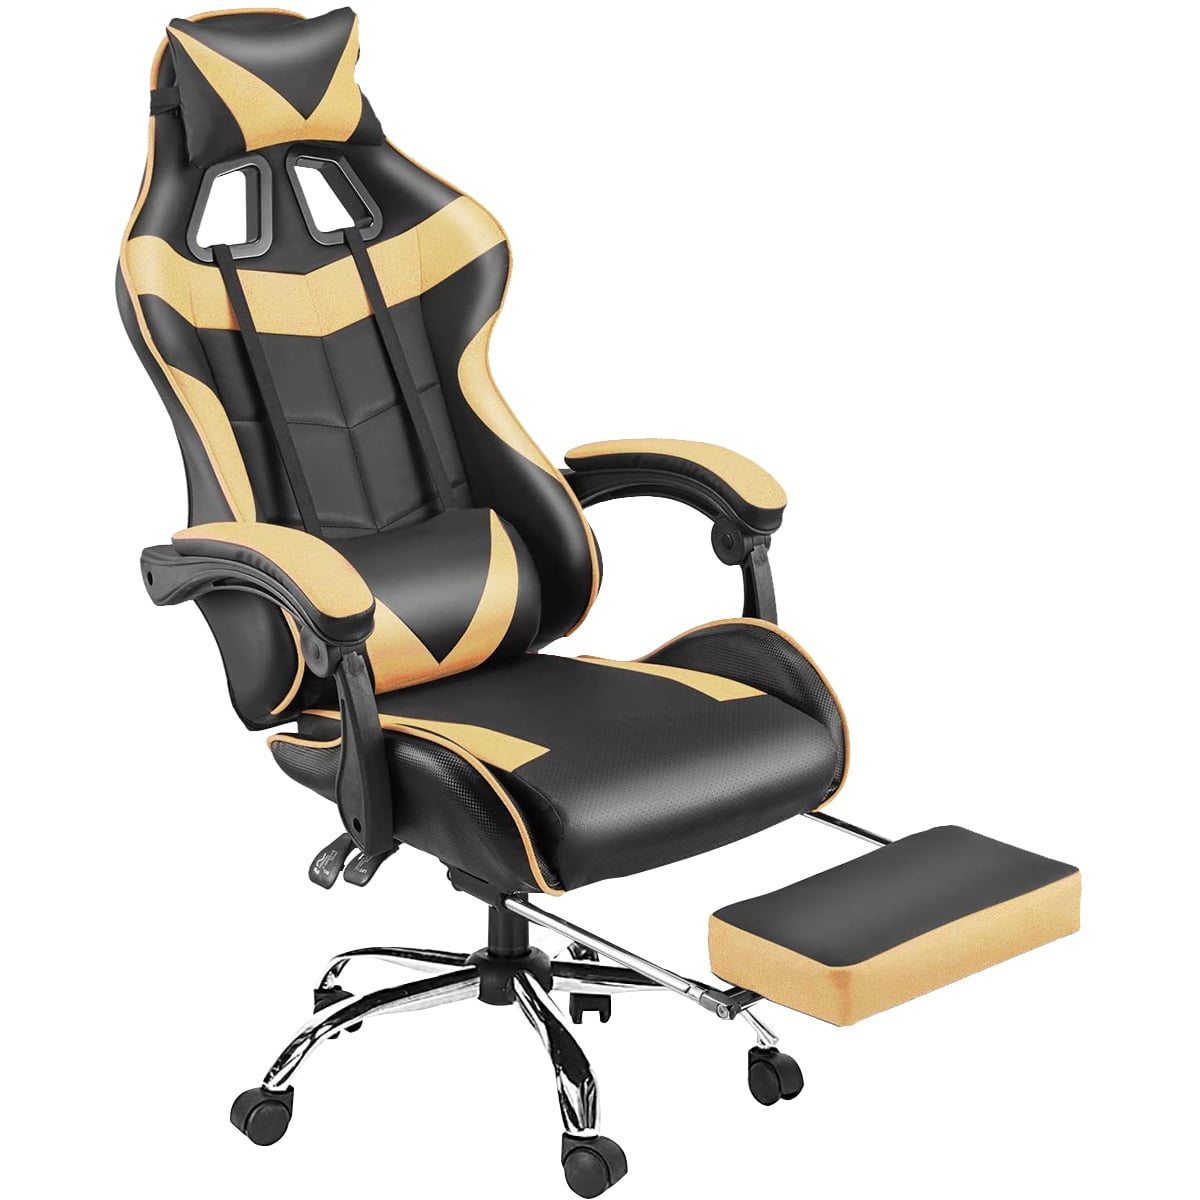 Computer Gaming Chair Highback Swivel Ergonomic Leather Racing Office Gold New 